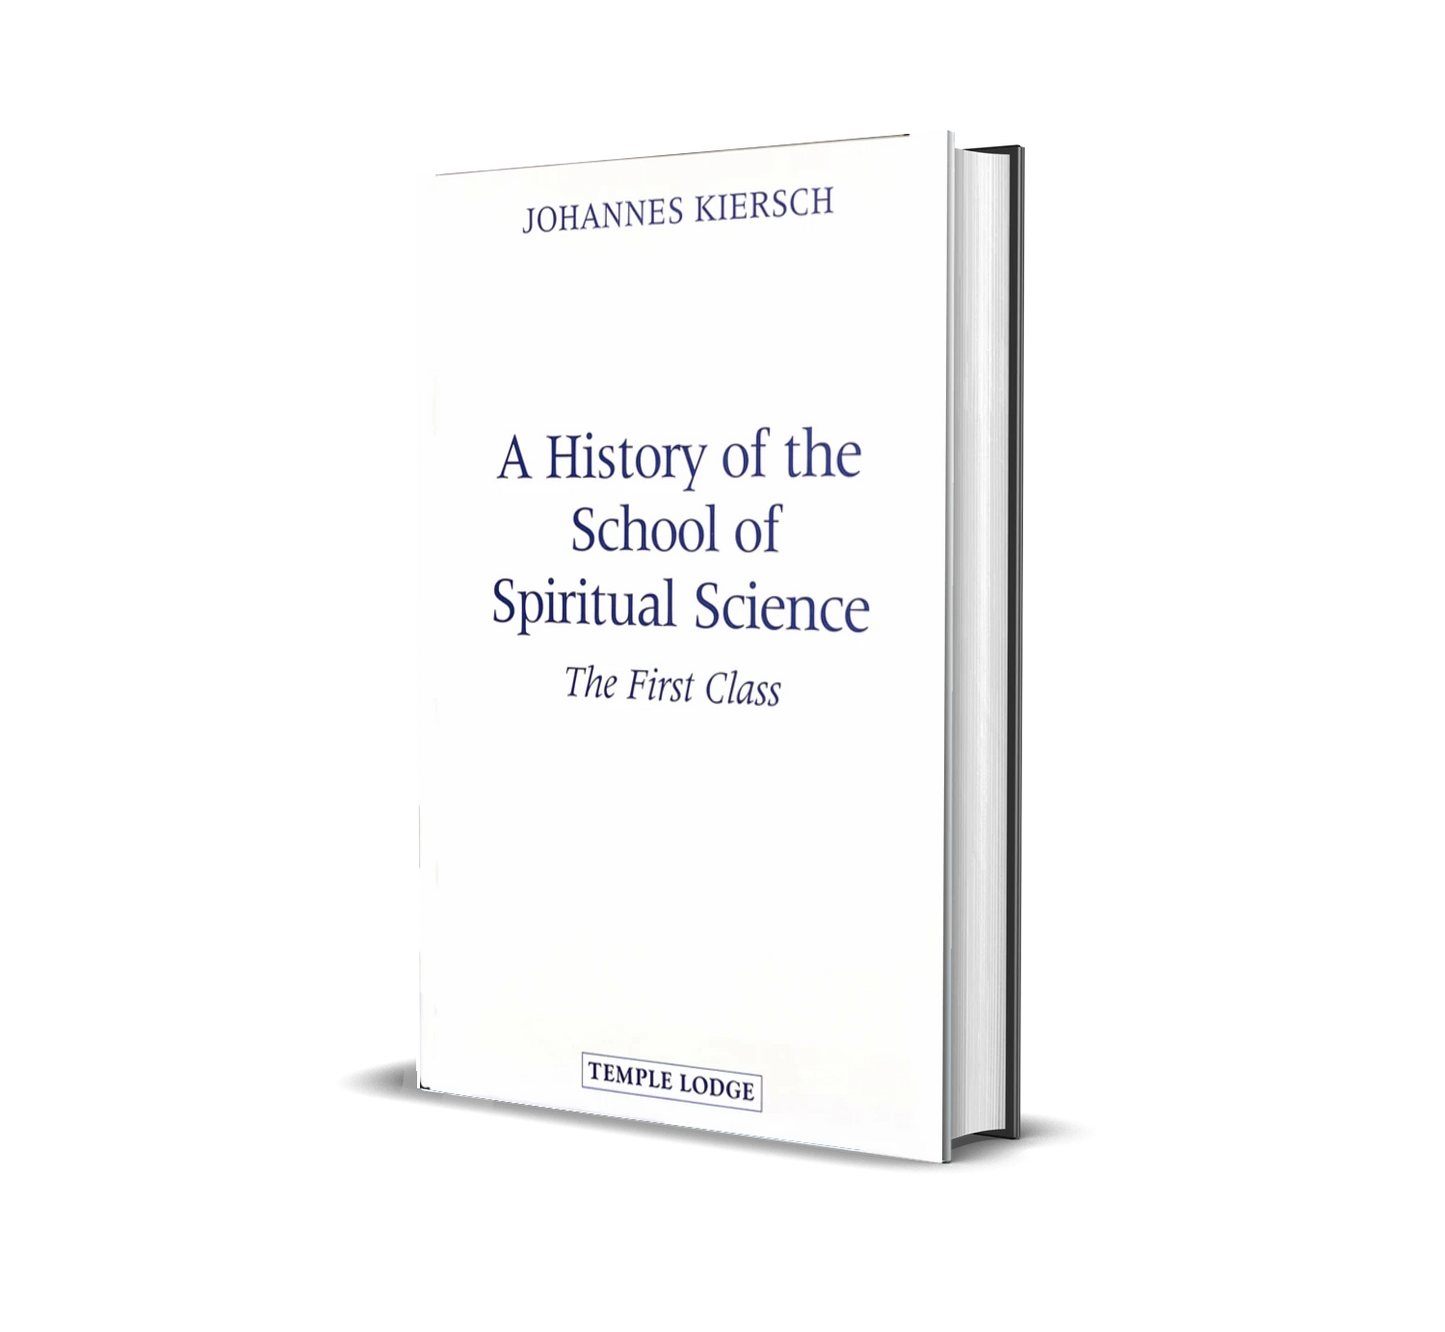 A History of the School of Spiritual Science